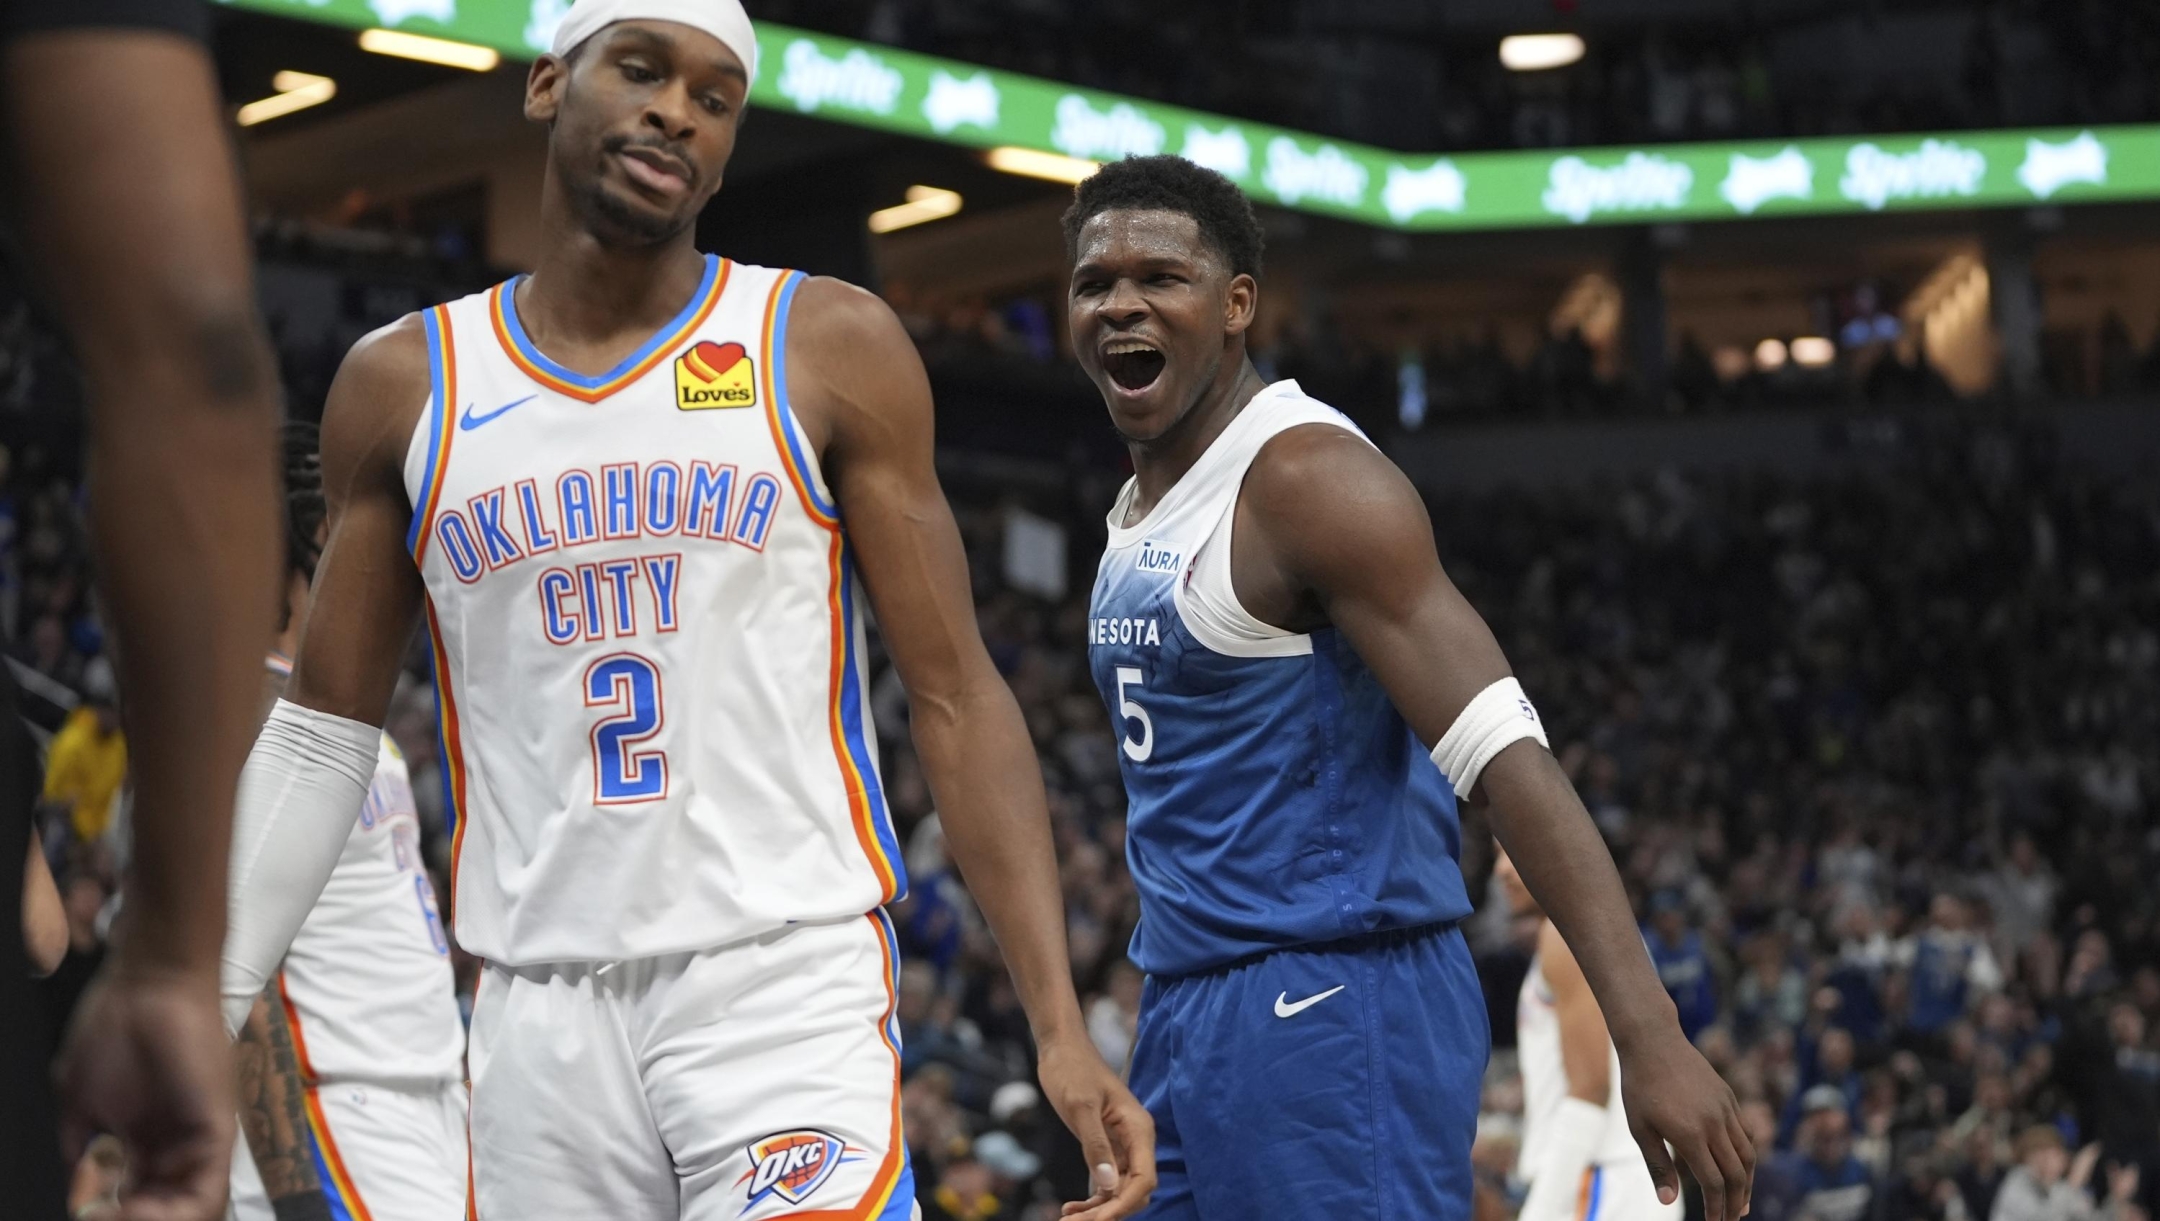 Minnesota Timberwolves guard Anthony Edwards (5) celebrates next to Oklahoma City Thunder guard Shai Gilgeous-Alexander (2) after making a basket and being fouled during the first half of an NBA basketball game Saturday, Jan. 20, 2024, in Minneapolis. (AP Photo/Abbie Parr)